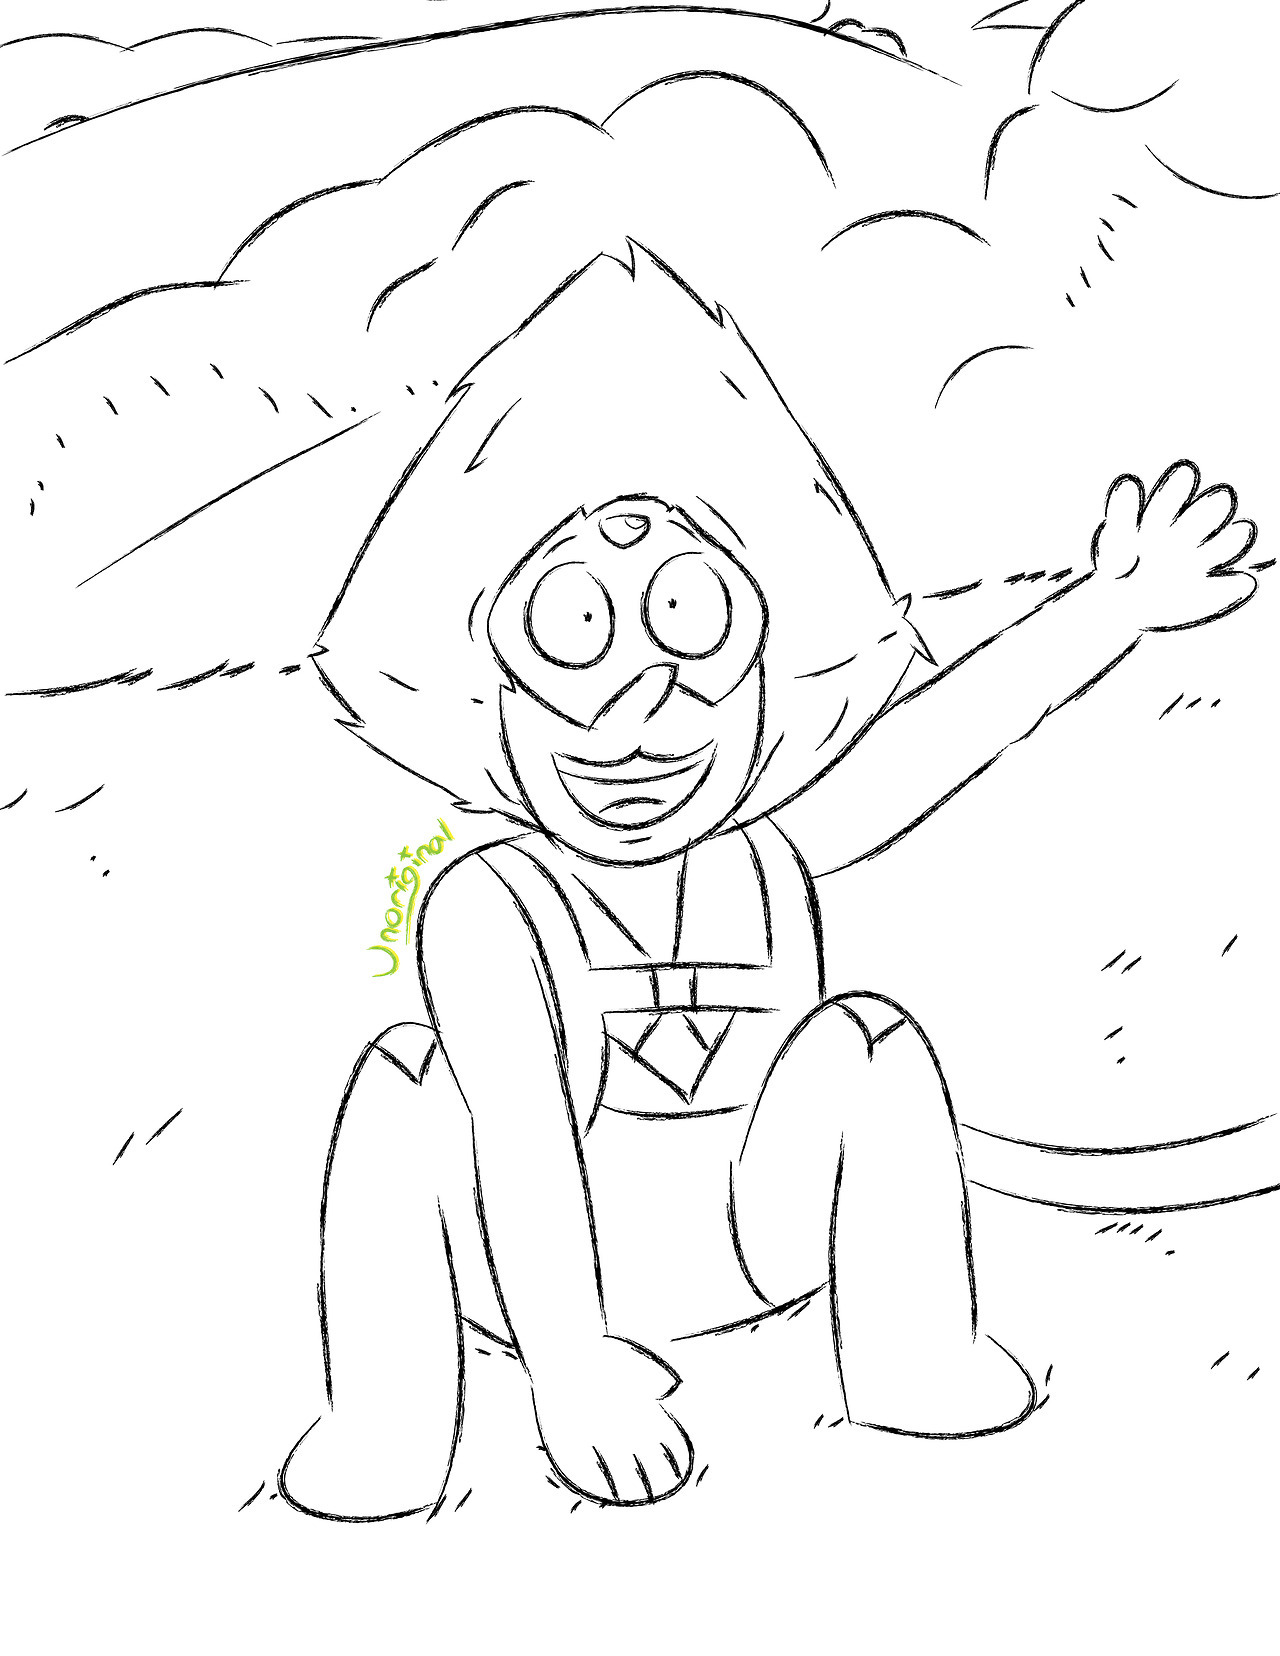 “Amethyst! Hi! Hi! Amethyst!”Another quick sketch of peridot just because I was